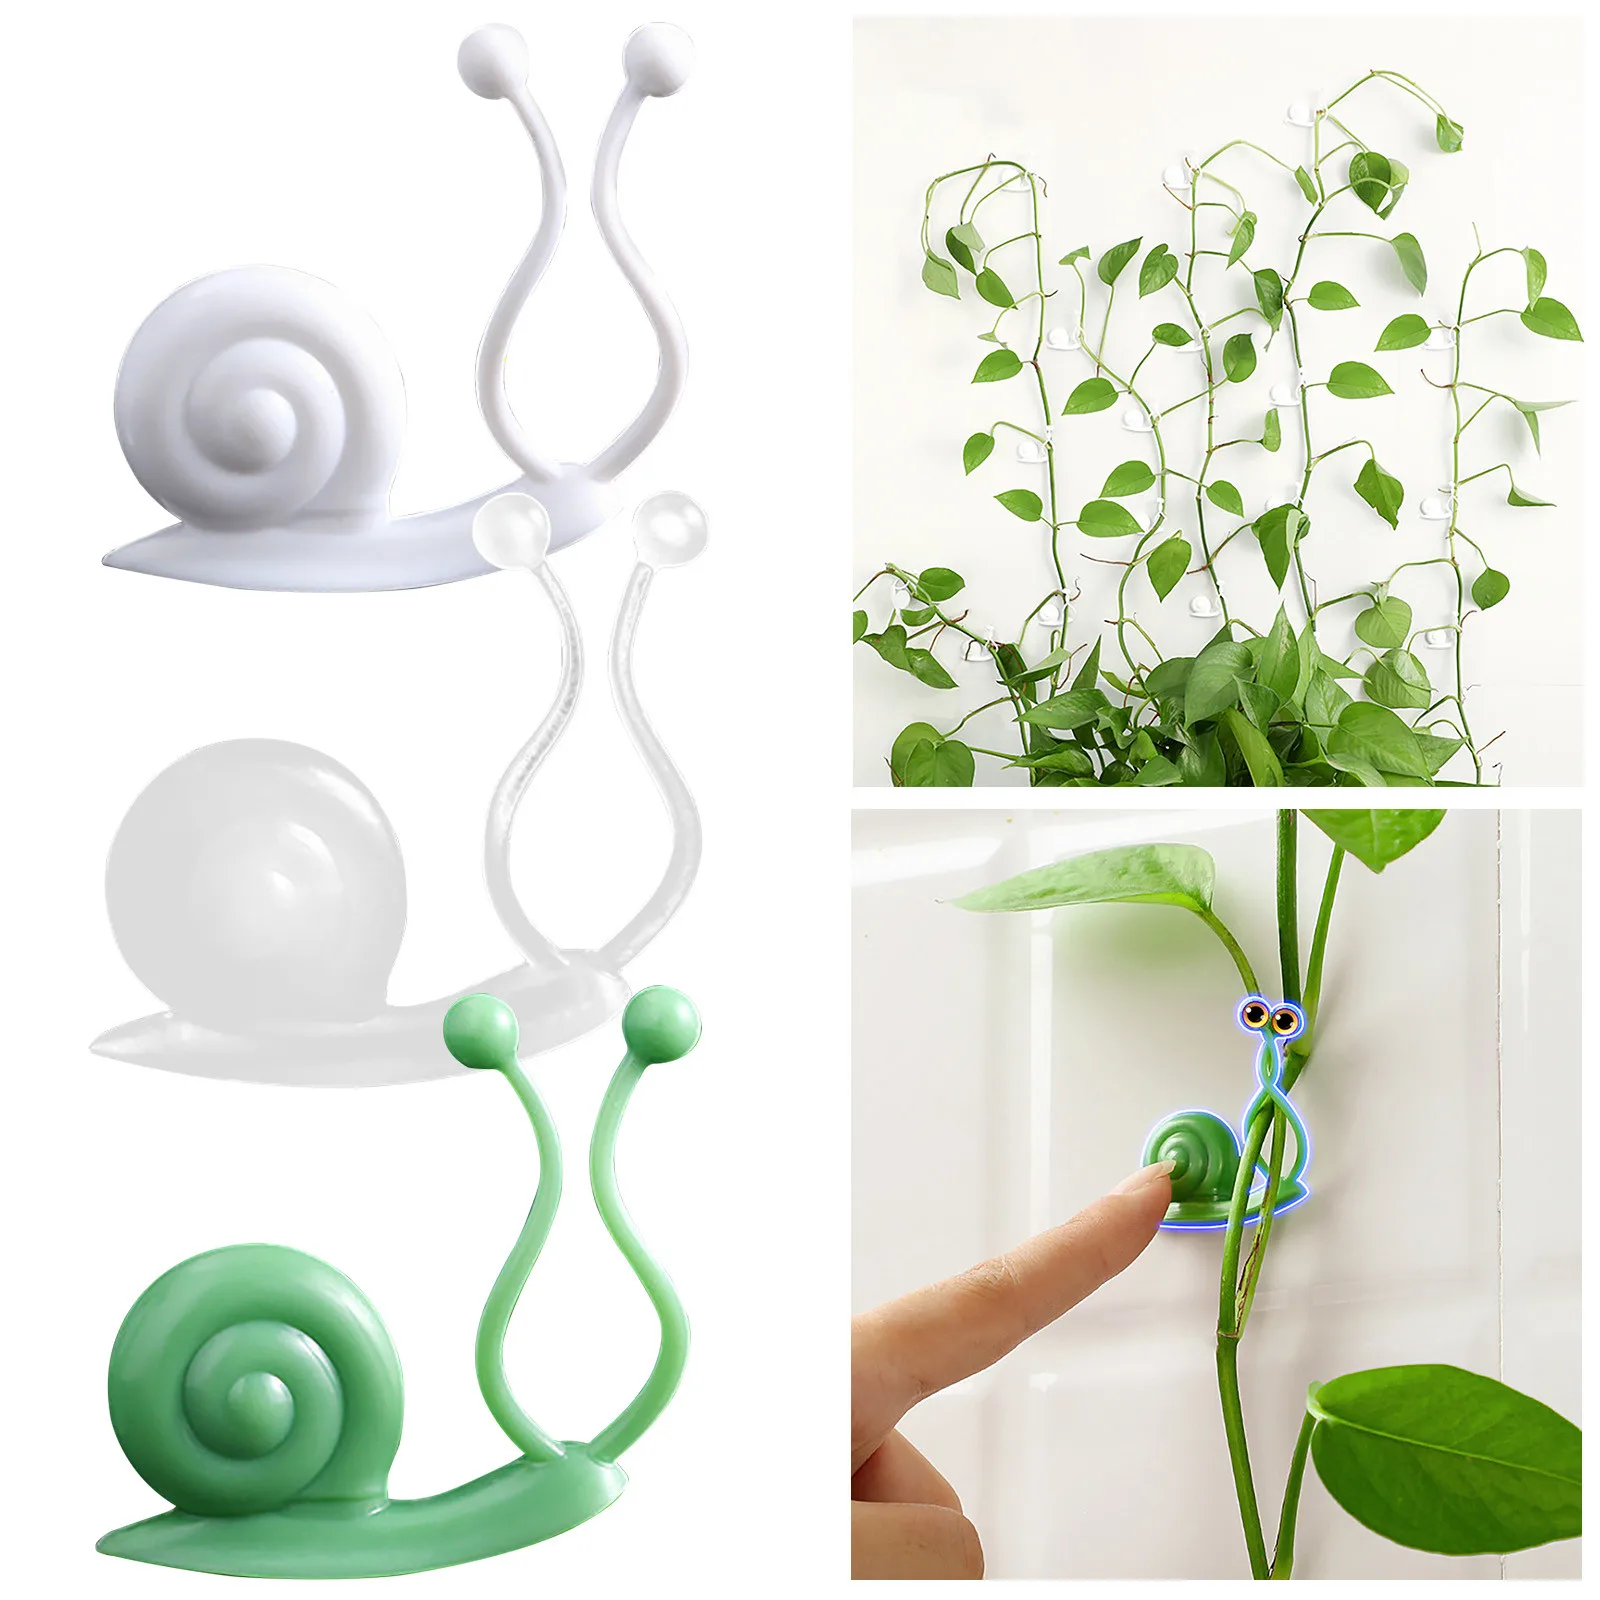 Details about   100 PCS Invisible Plant Climbing Wall Sticky Hook Vines Fixing Clips Fixture New 